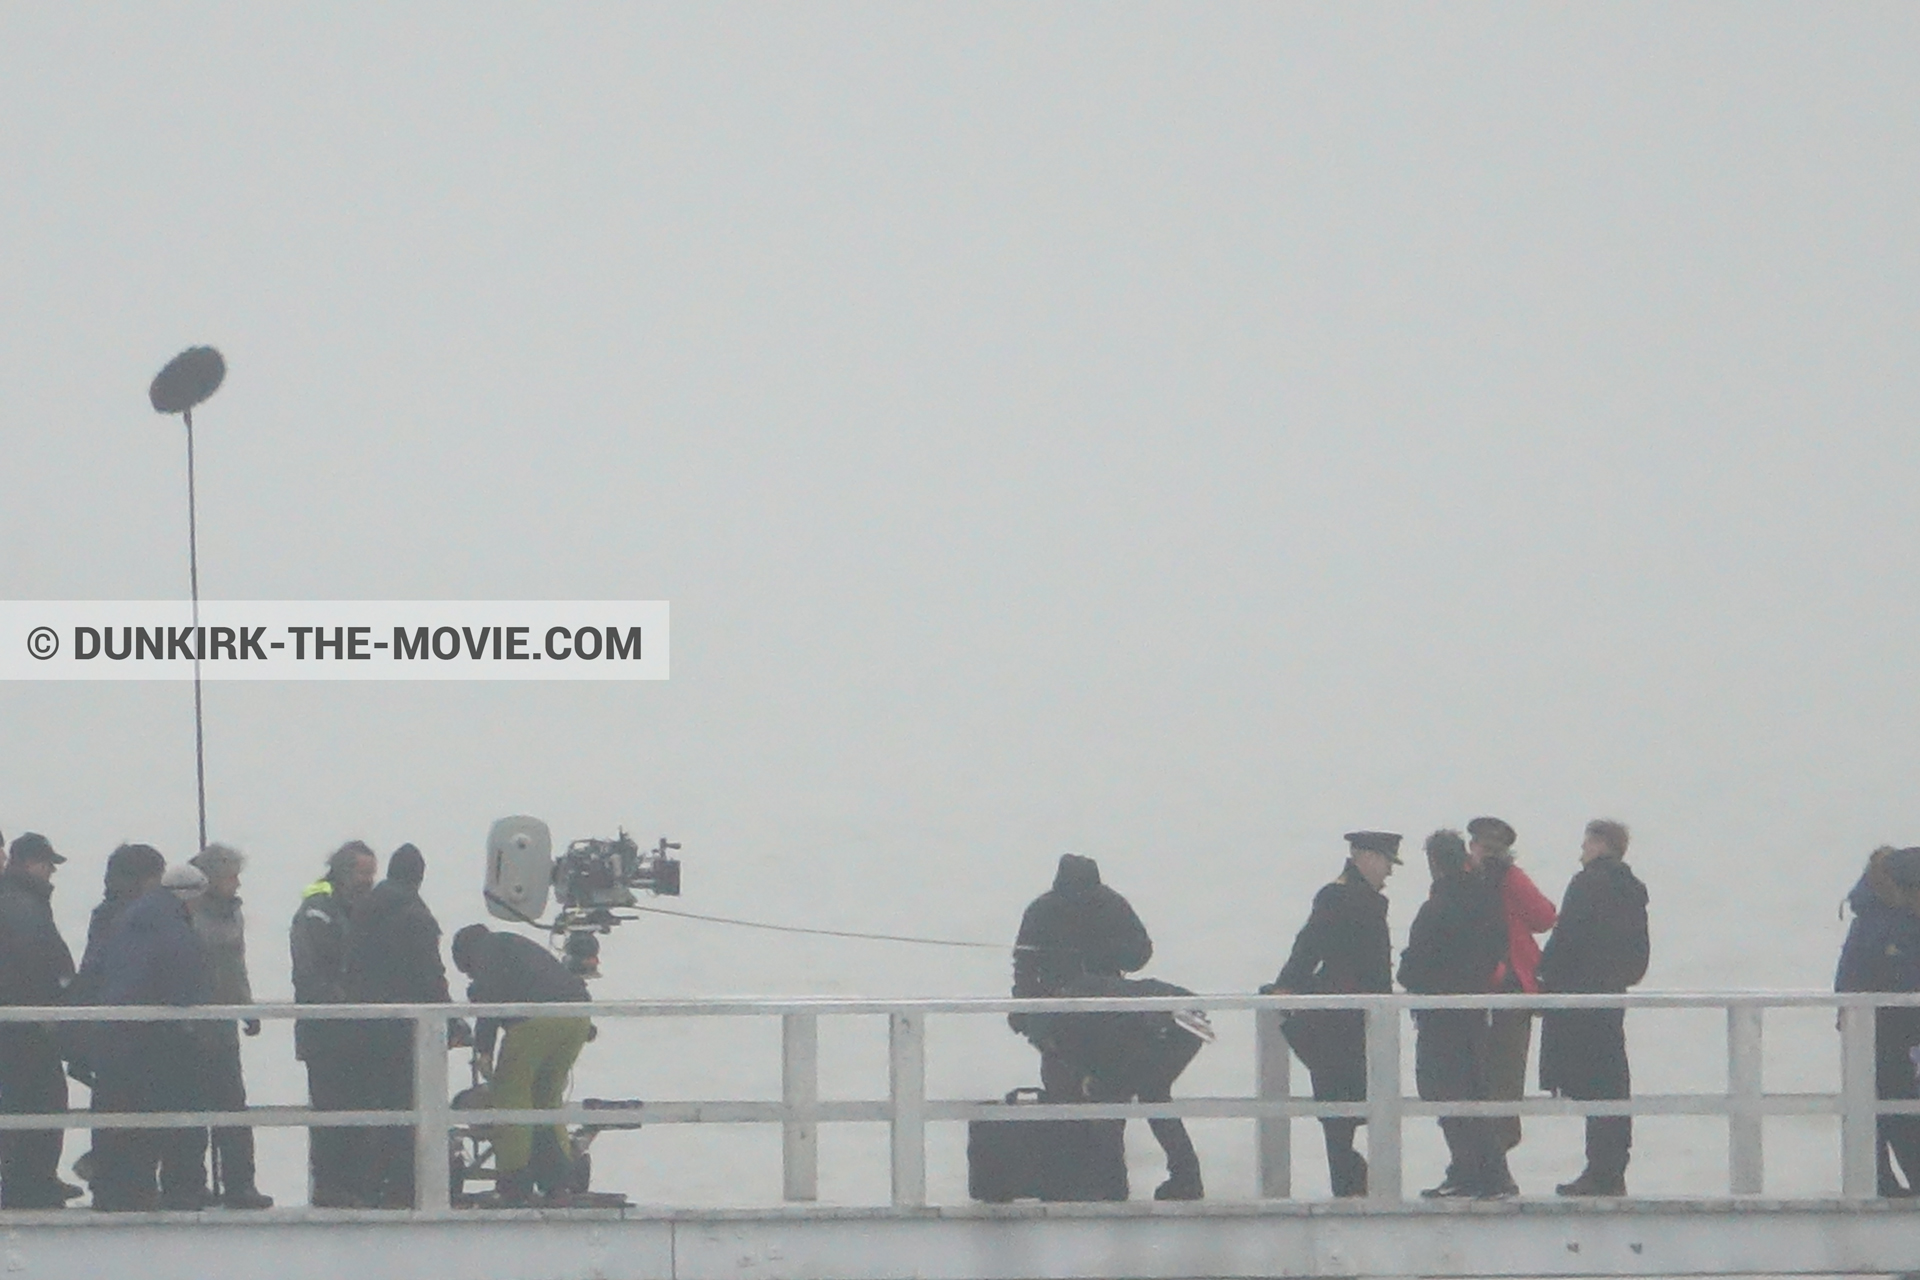 Picture with actor, boat, grey sky, Hoyte van Hoytema, Christopher Nolan,  from behind the scene of the Dunkirk movie by Nolan